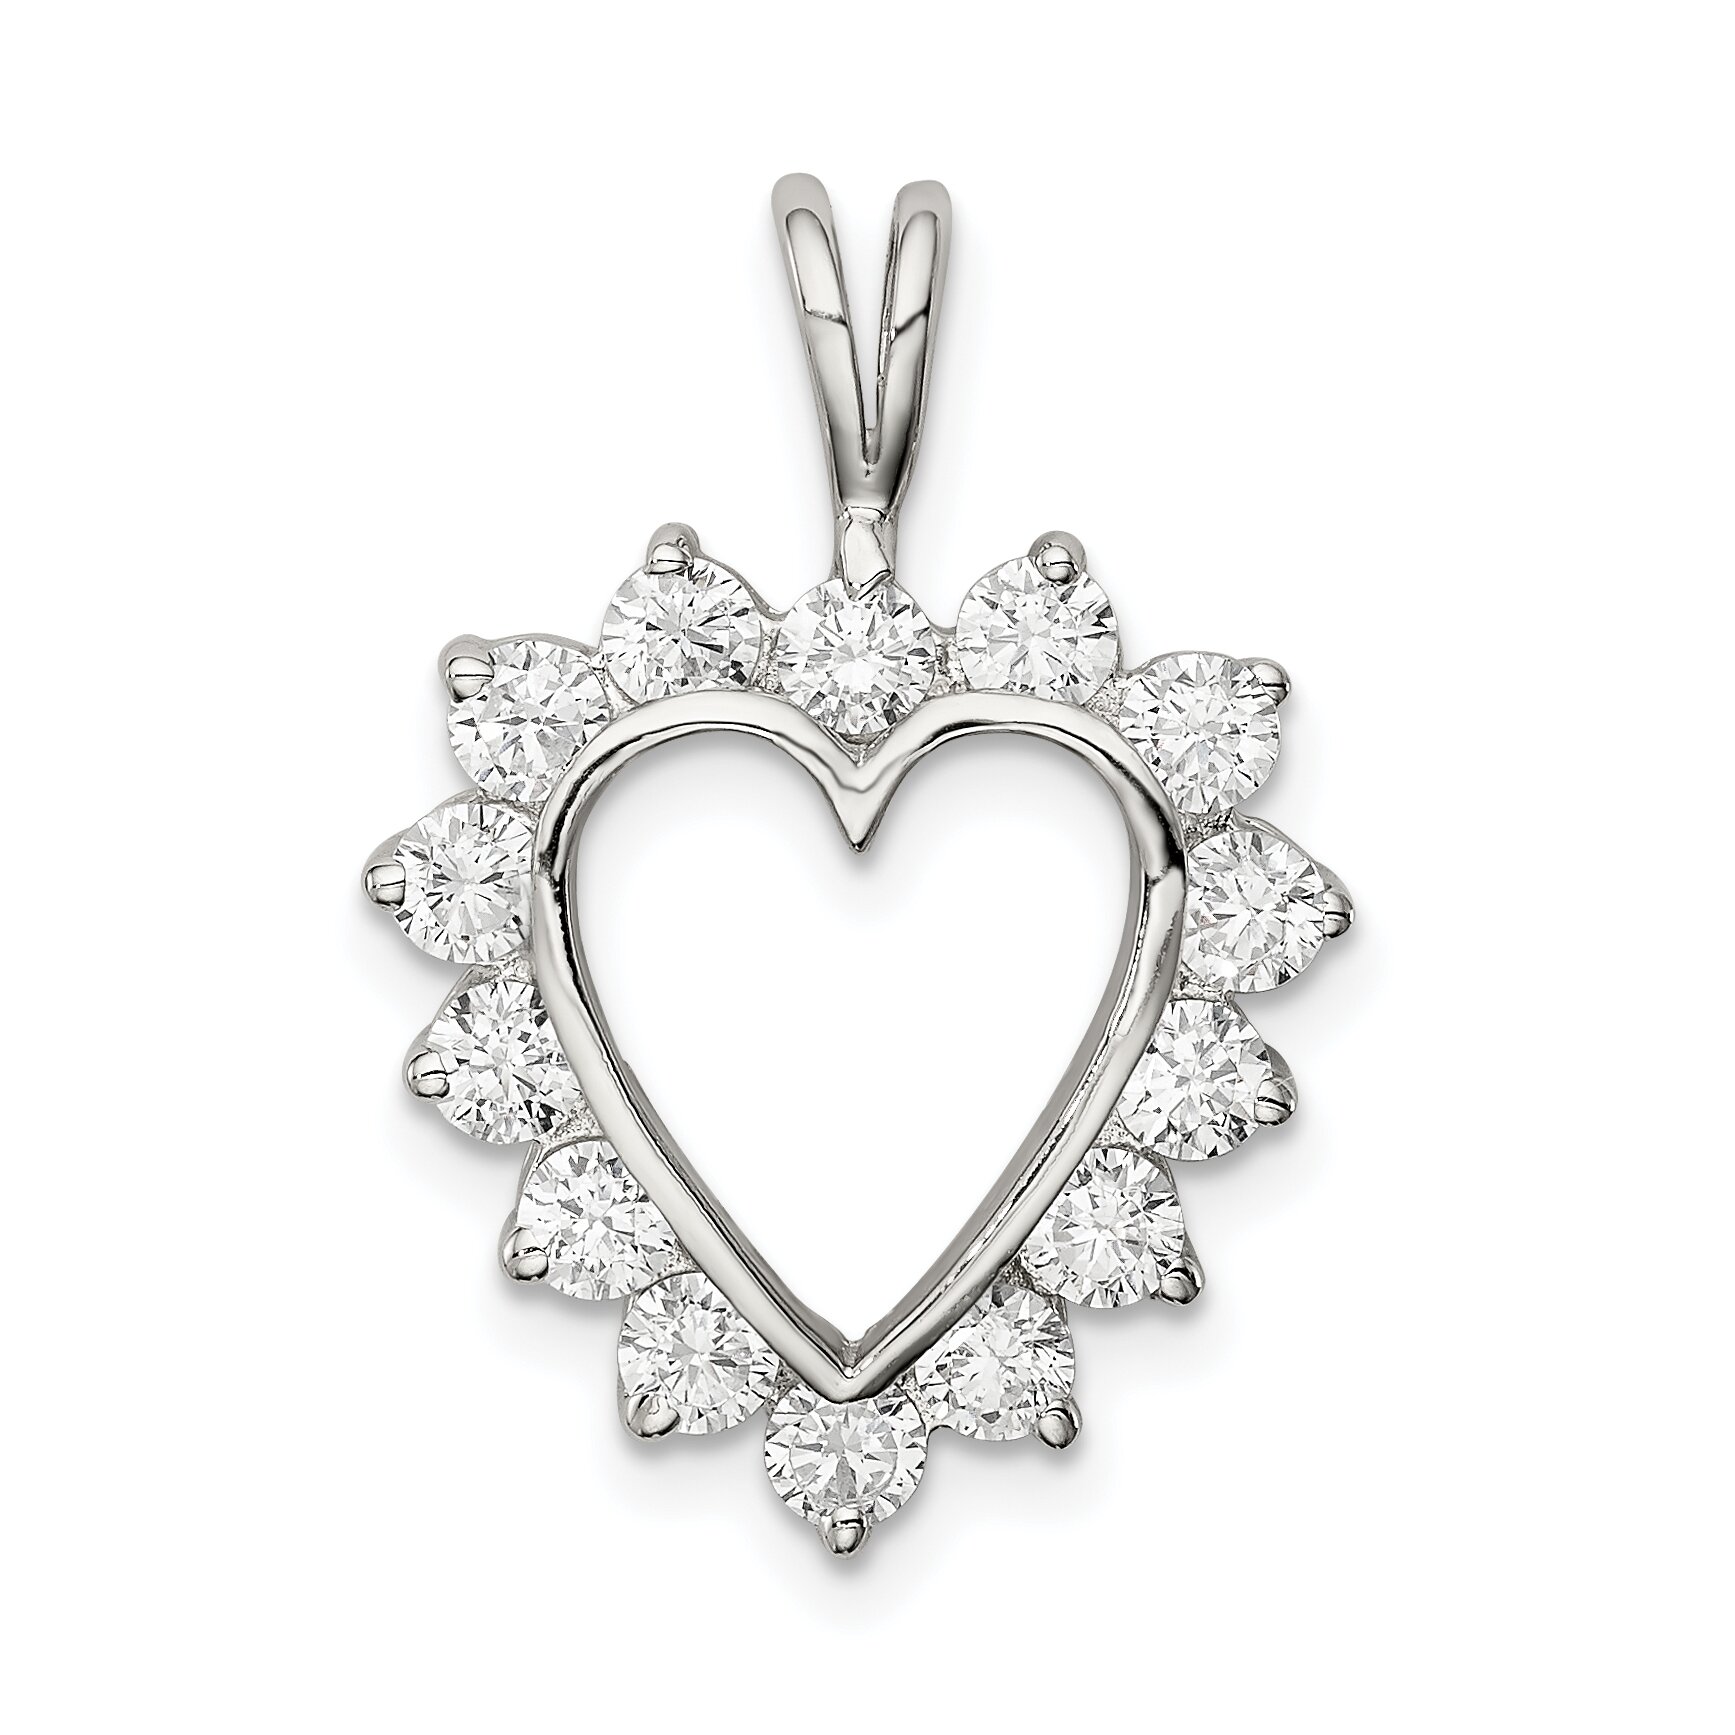 Findingking Sterling Silver Cubic Zirconia Heart Charm